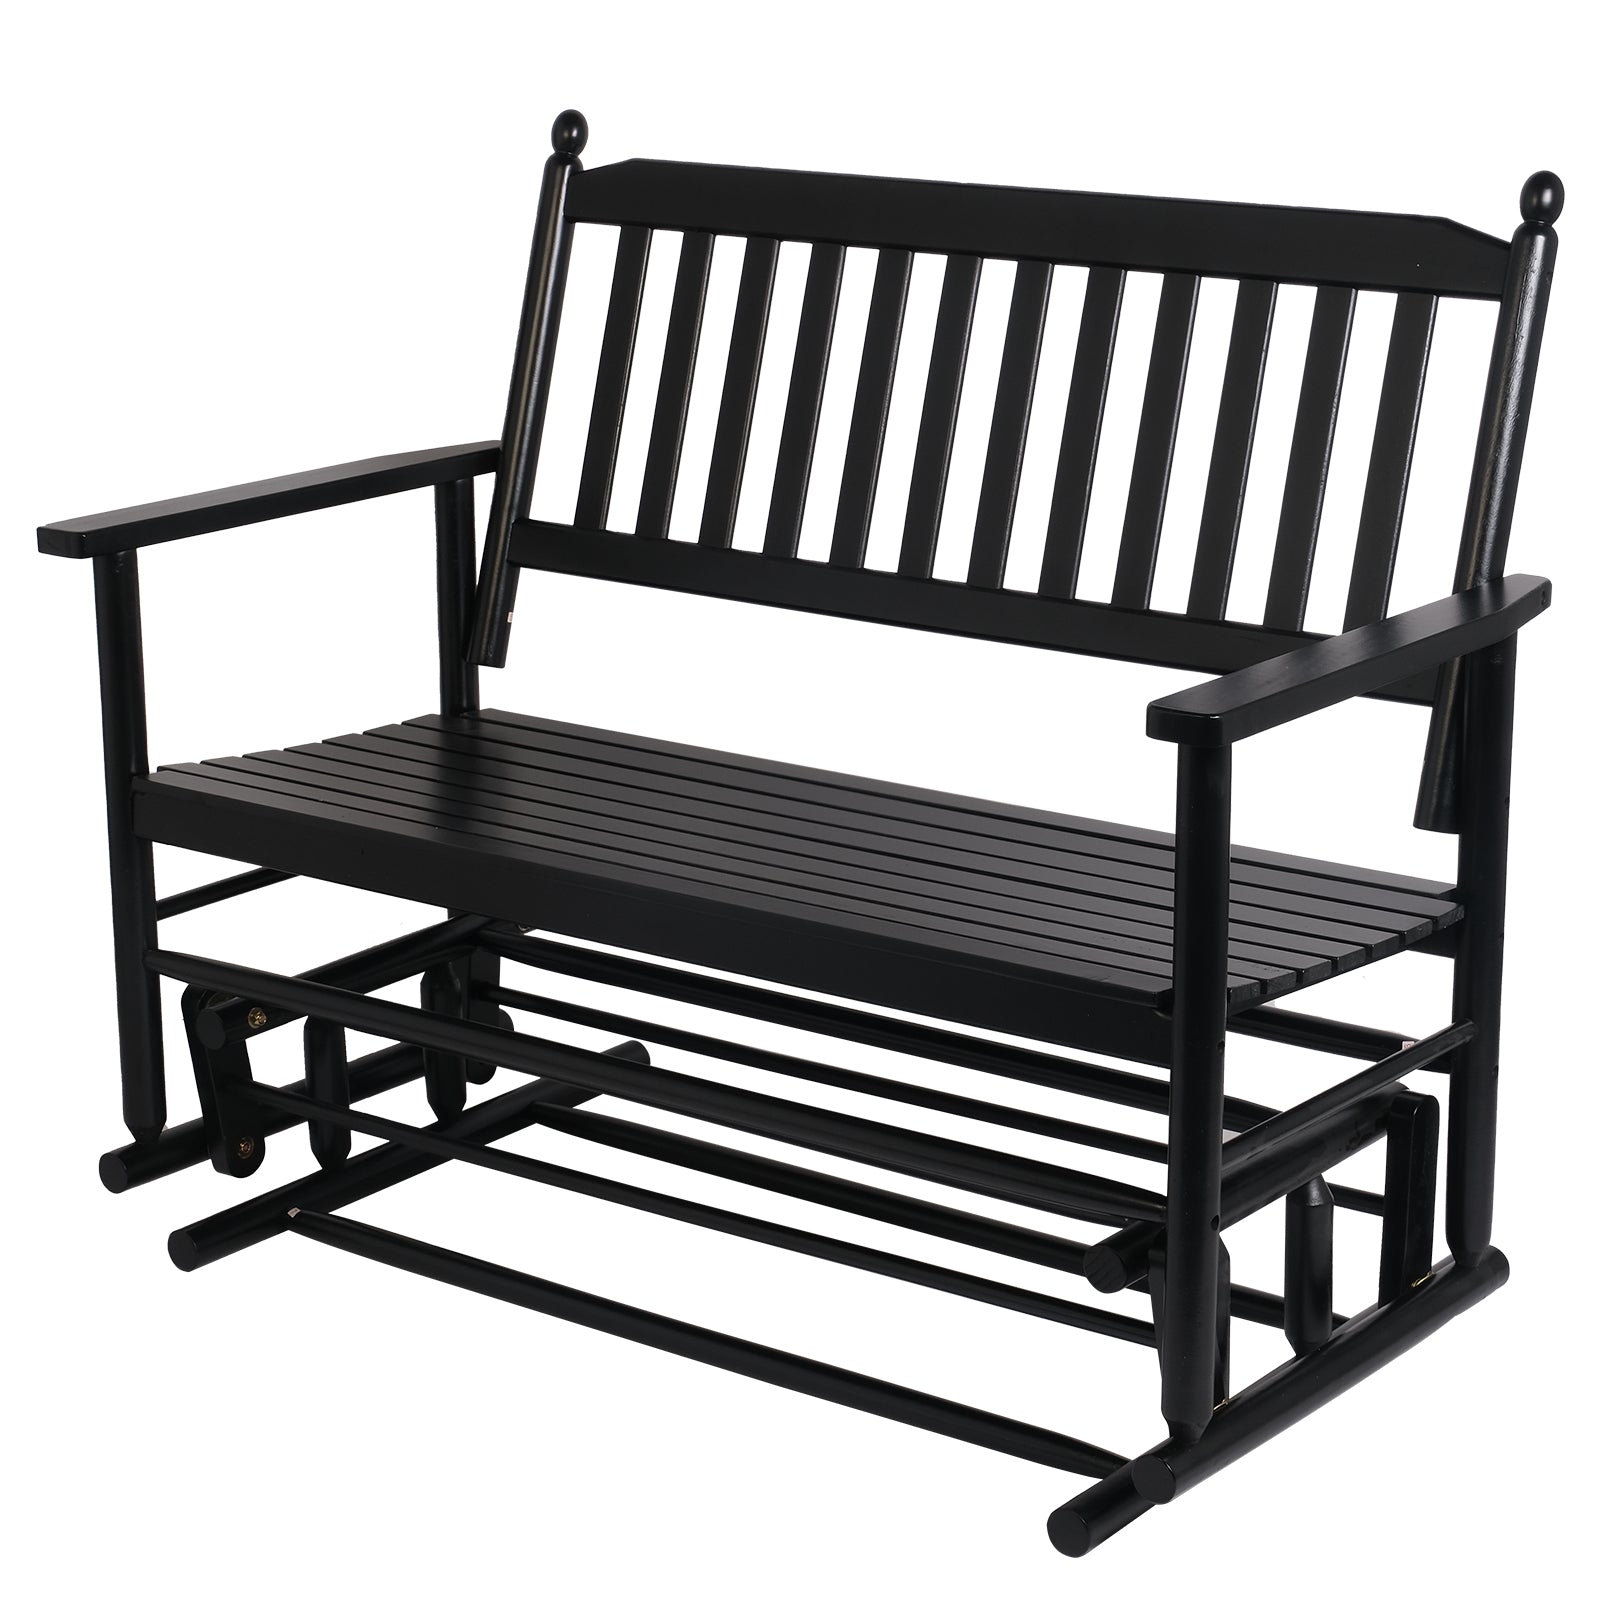 Outdoor Patio Swing Glider Bench 2-Person Wooden Rocking Bench Outdoor Seating Chairs, Black